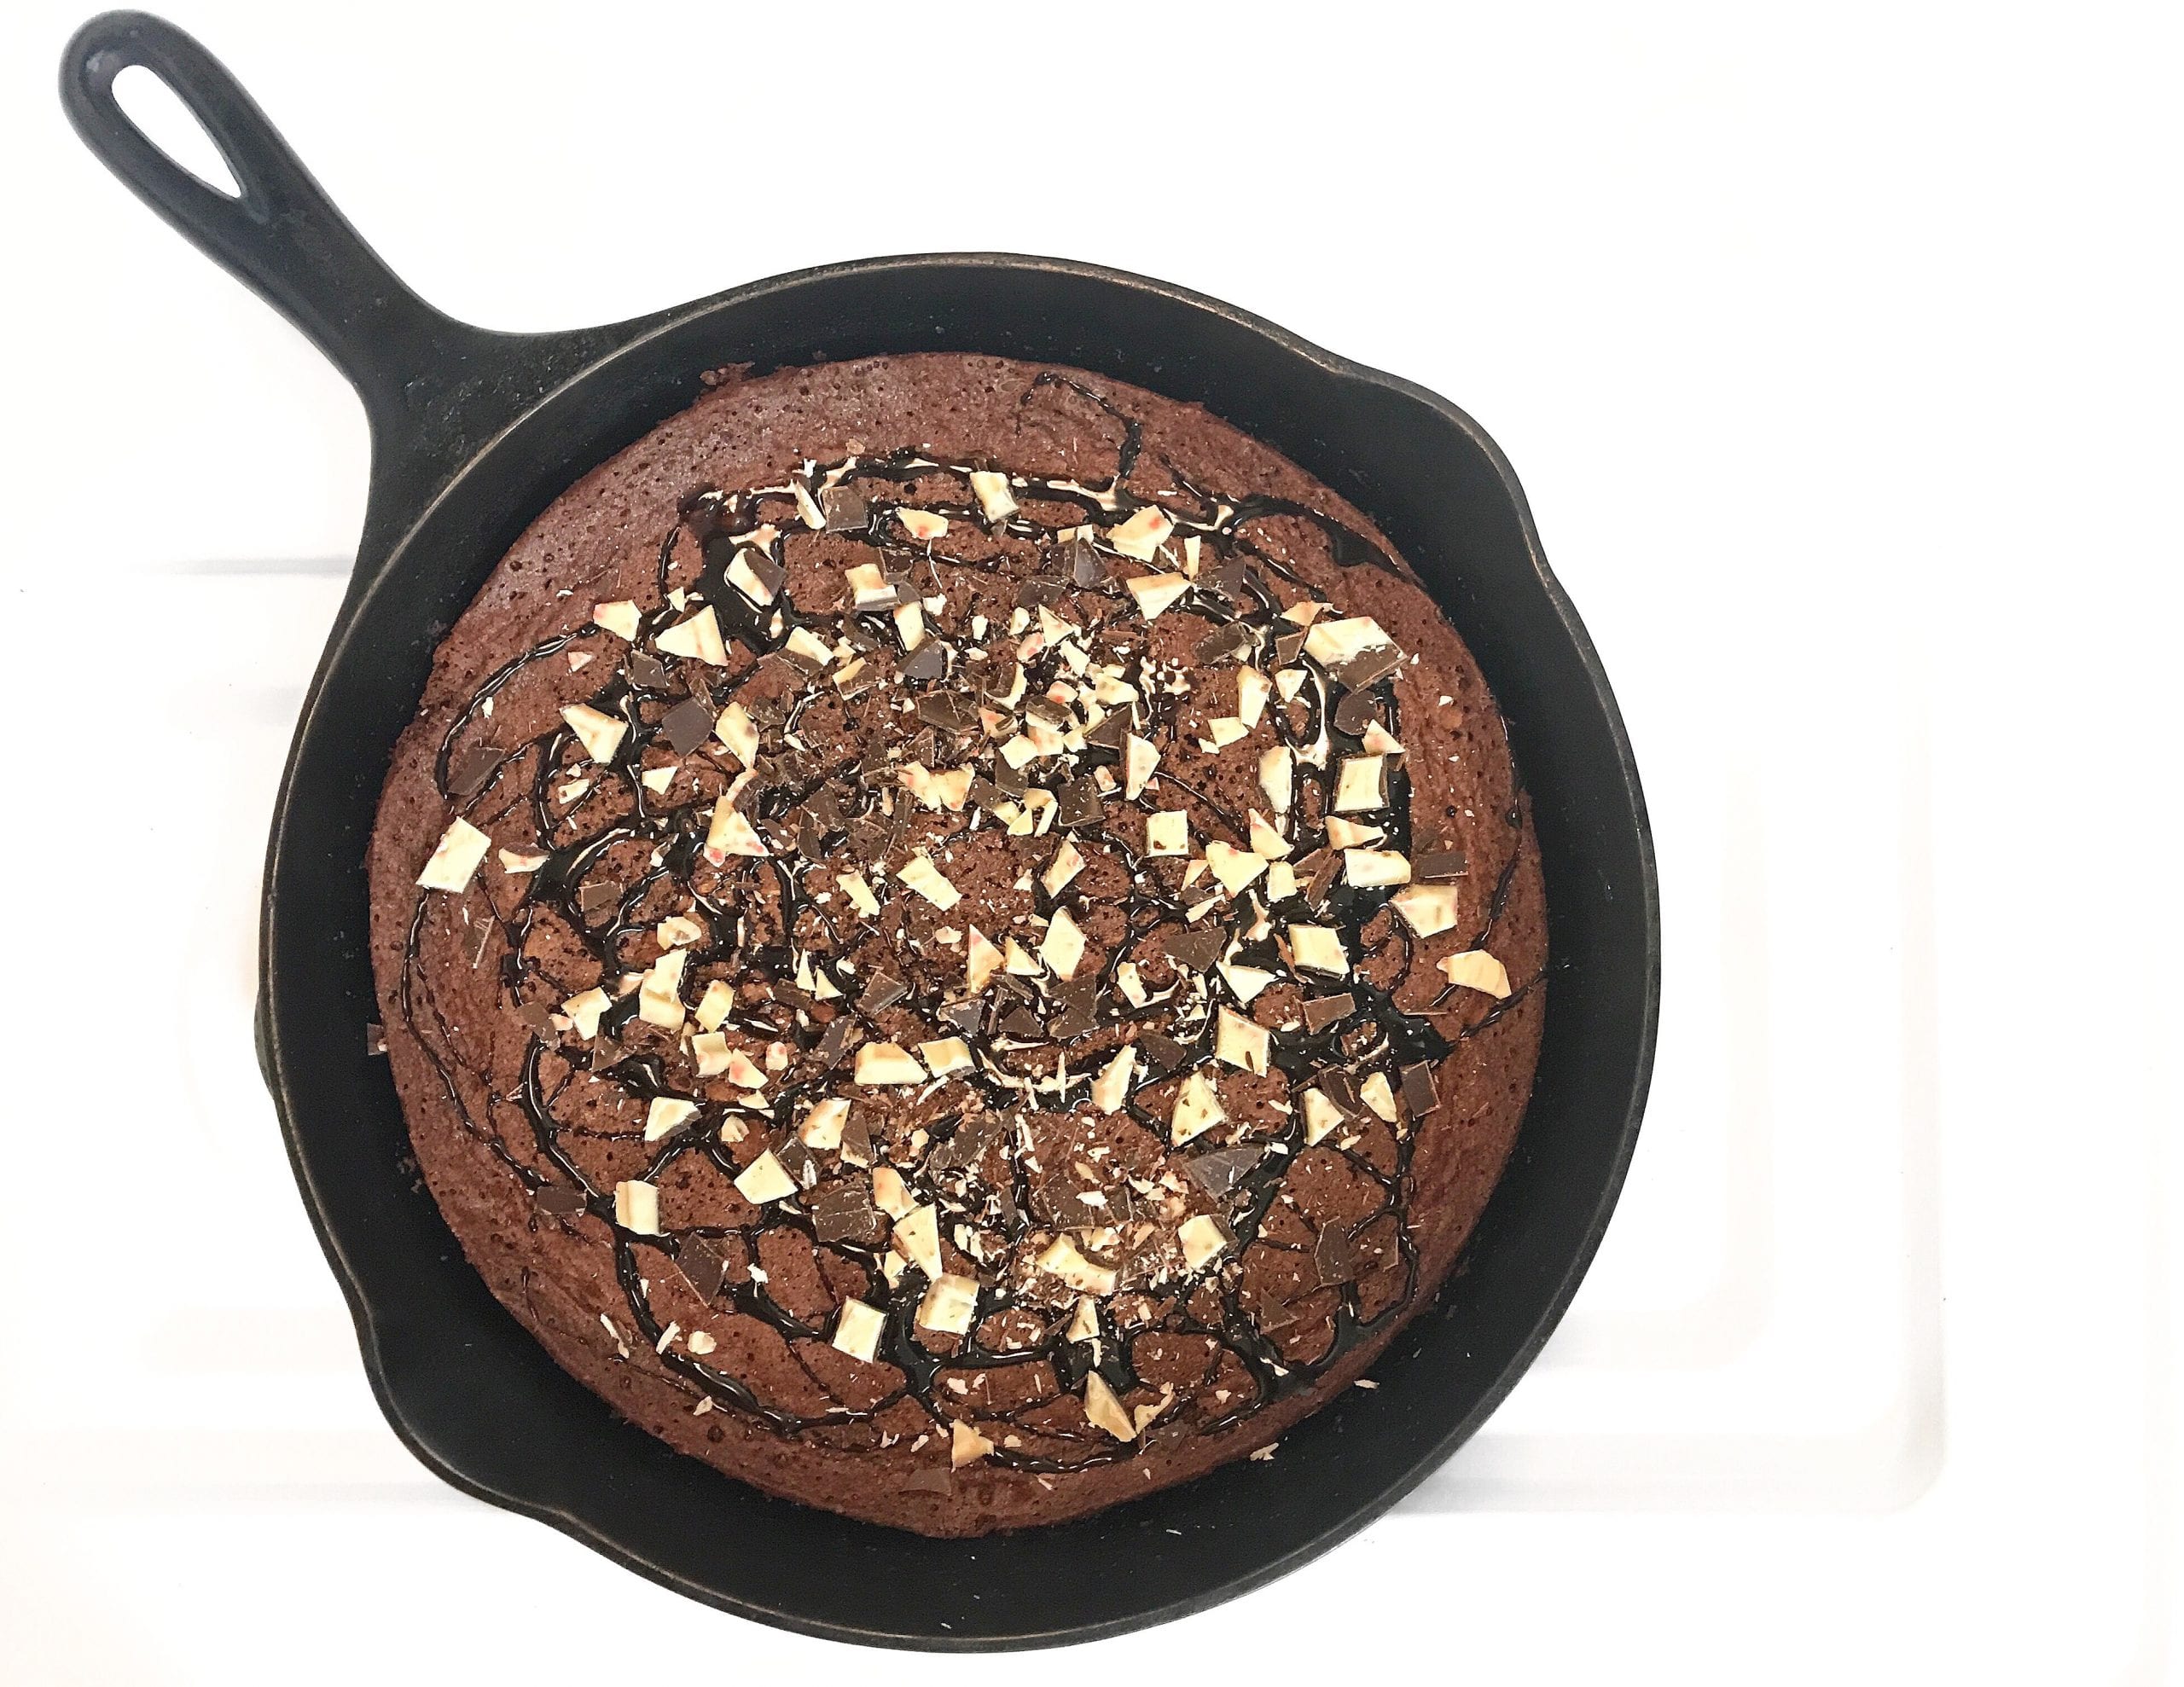 Brownies in a Cast Iron Skillet - Amanda's Cookin' 